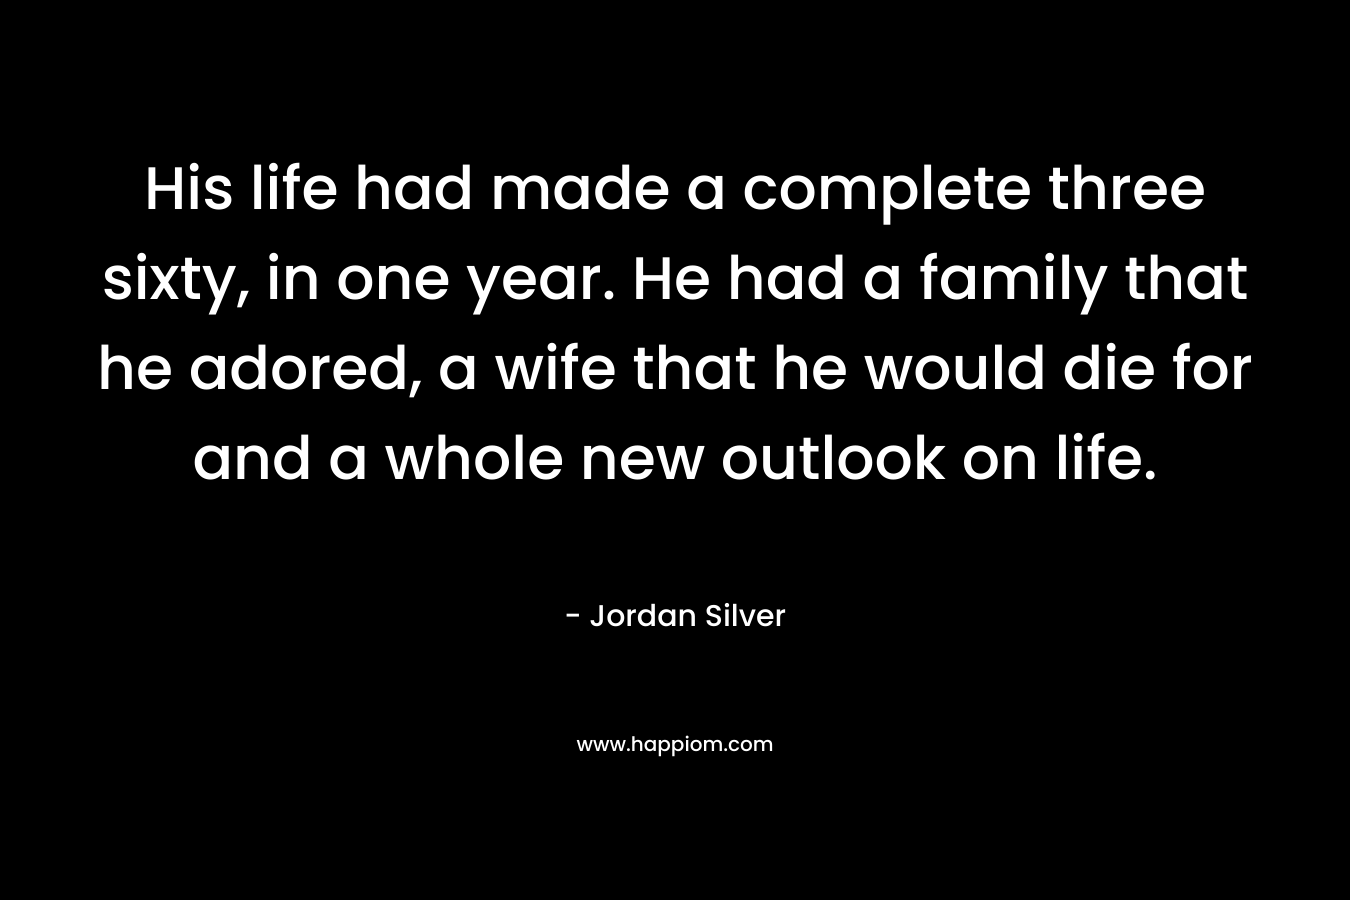 His life had made a complete three sixty, in one year. He had a family that he adored, a wife that he would die for and a whole new outlook on life. – Jordan Silver